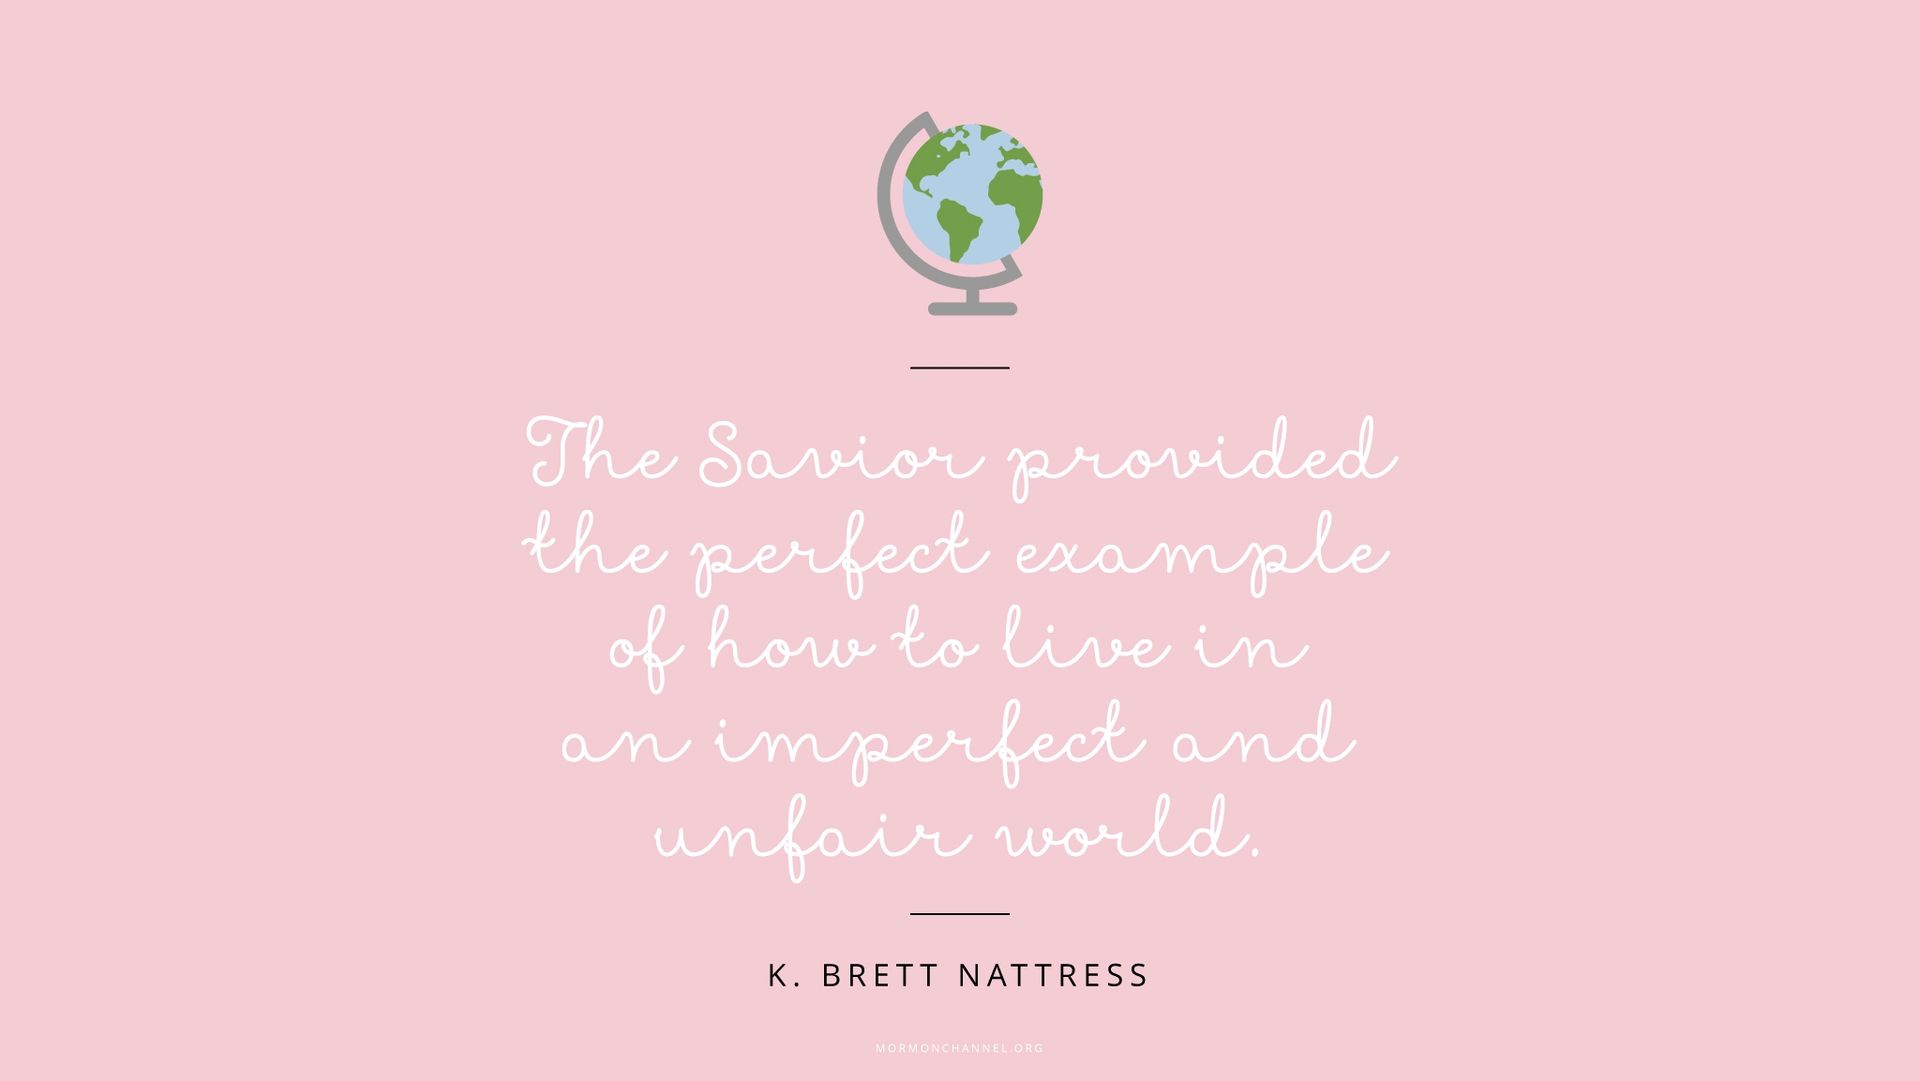 “The Savior provided the perfect example of how to live in an imperfect and unfair world.”—Elder K. Brett Nattress, “No Greater Joy Than to Know That They Know” © undefined ipCode 1.